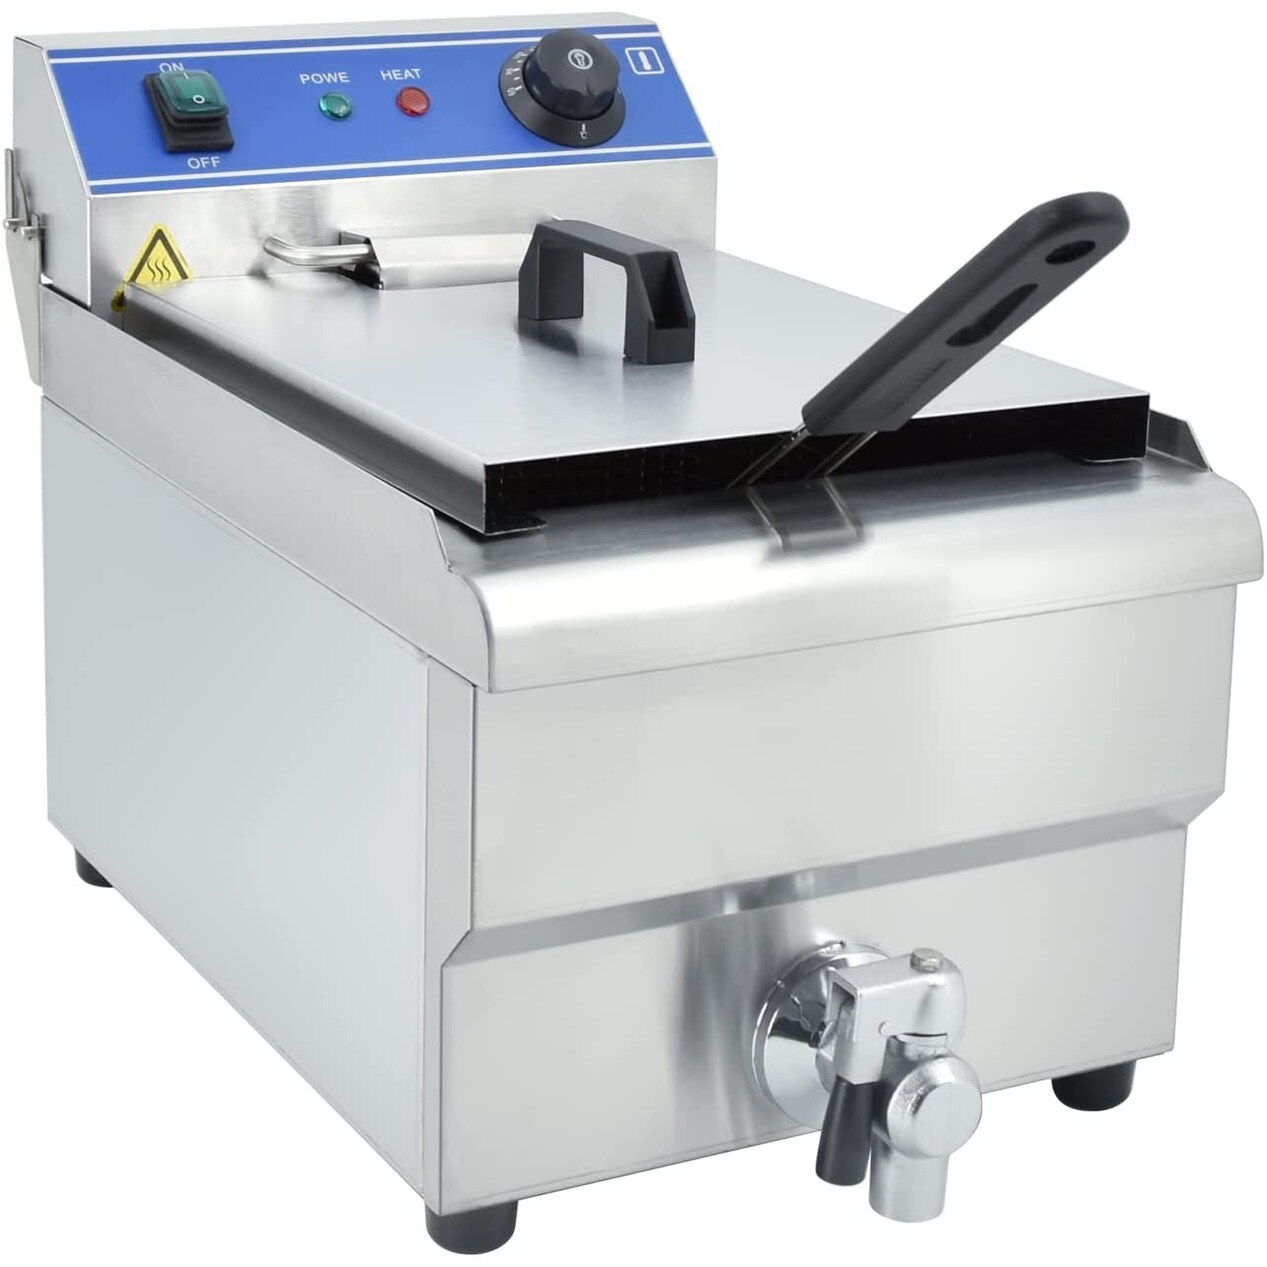 https://ak1.ostkcdn.com/images/products/is/images/direct/1373ee492c1b102d299c89d541a506103b3e5af0/Commercial-Deep-Fryer%2C-6L-1500W-Stainless-Steel-Countertop-Single-Tank-Electric-Deep-Fryer-with-Basket%2CLid%2CDrain.jpg